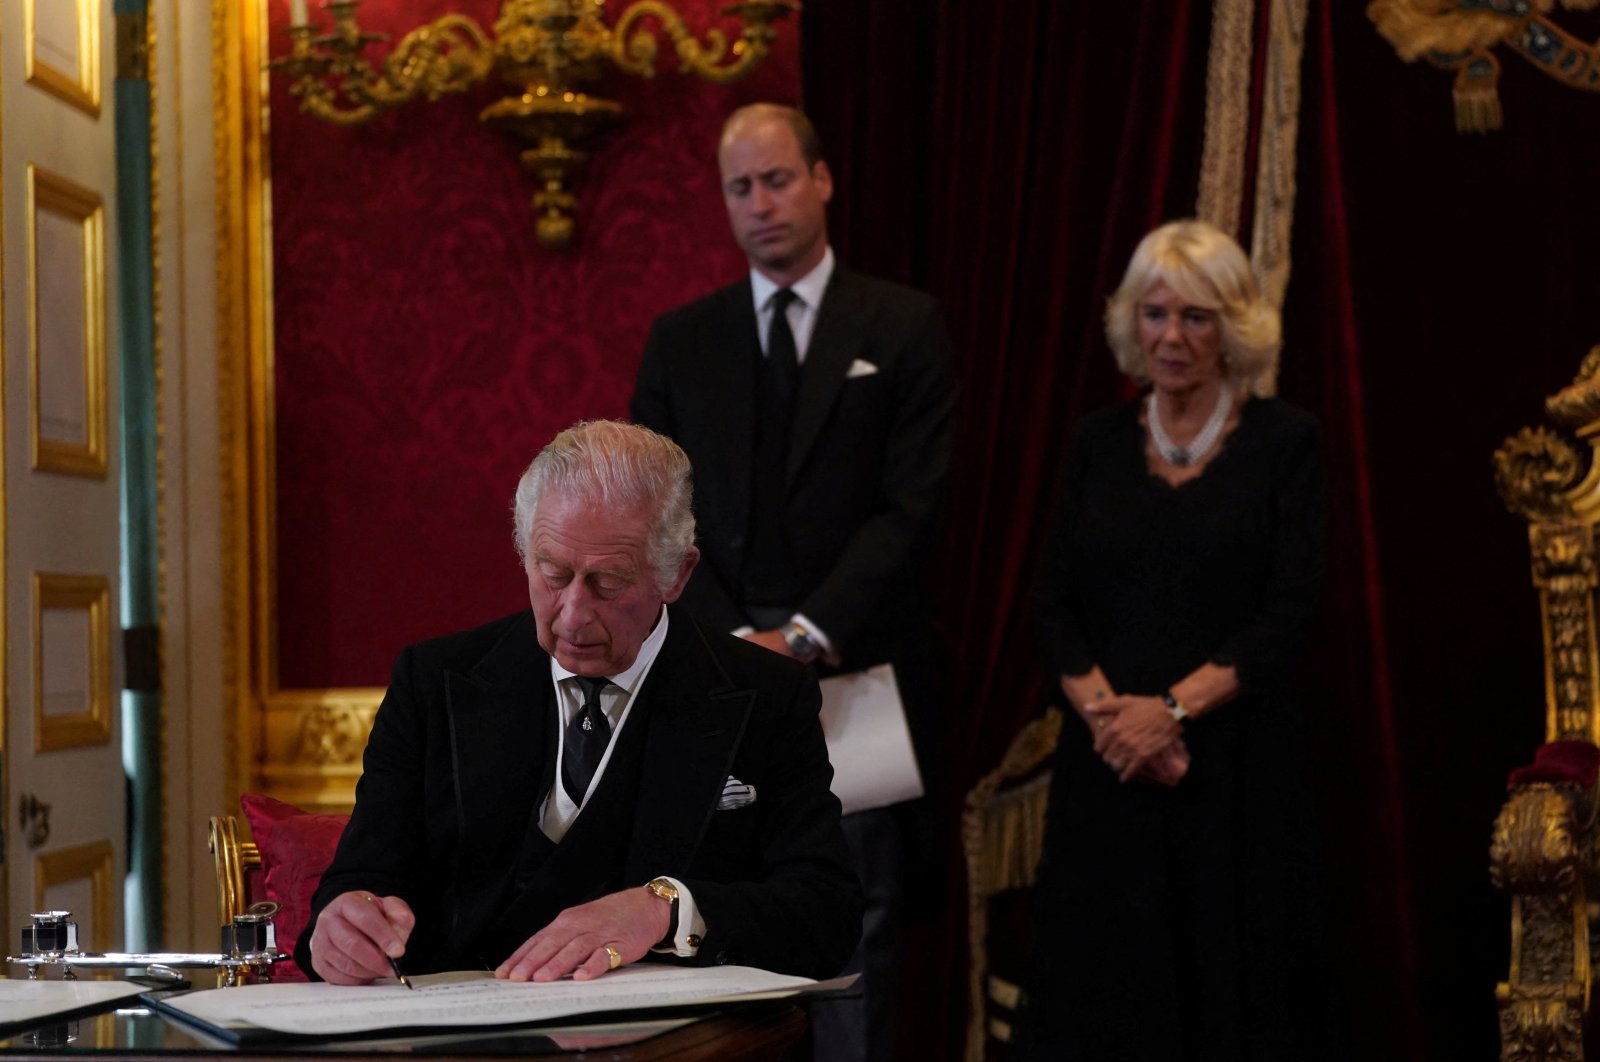 Britain&#039;s King Charles signs an oath during the Accession Council at St. James&#039;s Palace, where he was formally proclaimed Britain&#039;s new monarch, following the death of Queen Elizabeth II, in London, Britain, Sept. 10, 2022. (Reuters Photo)